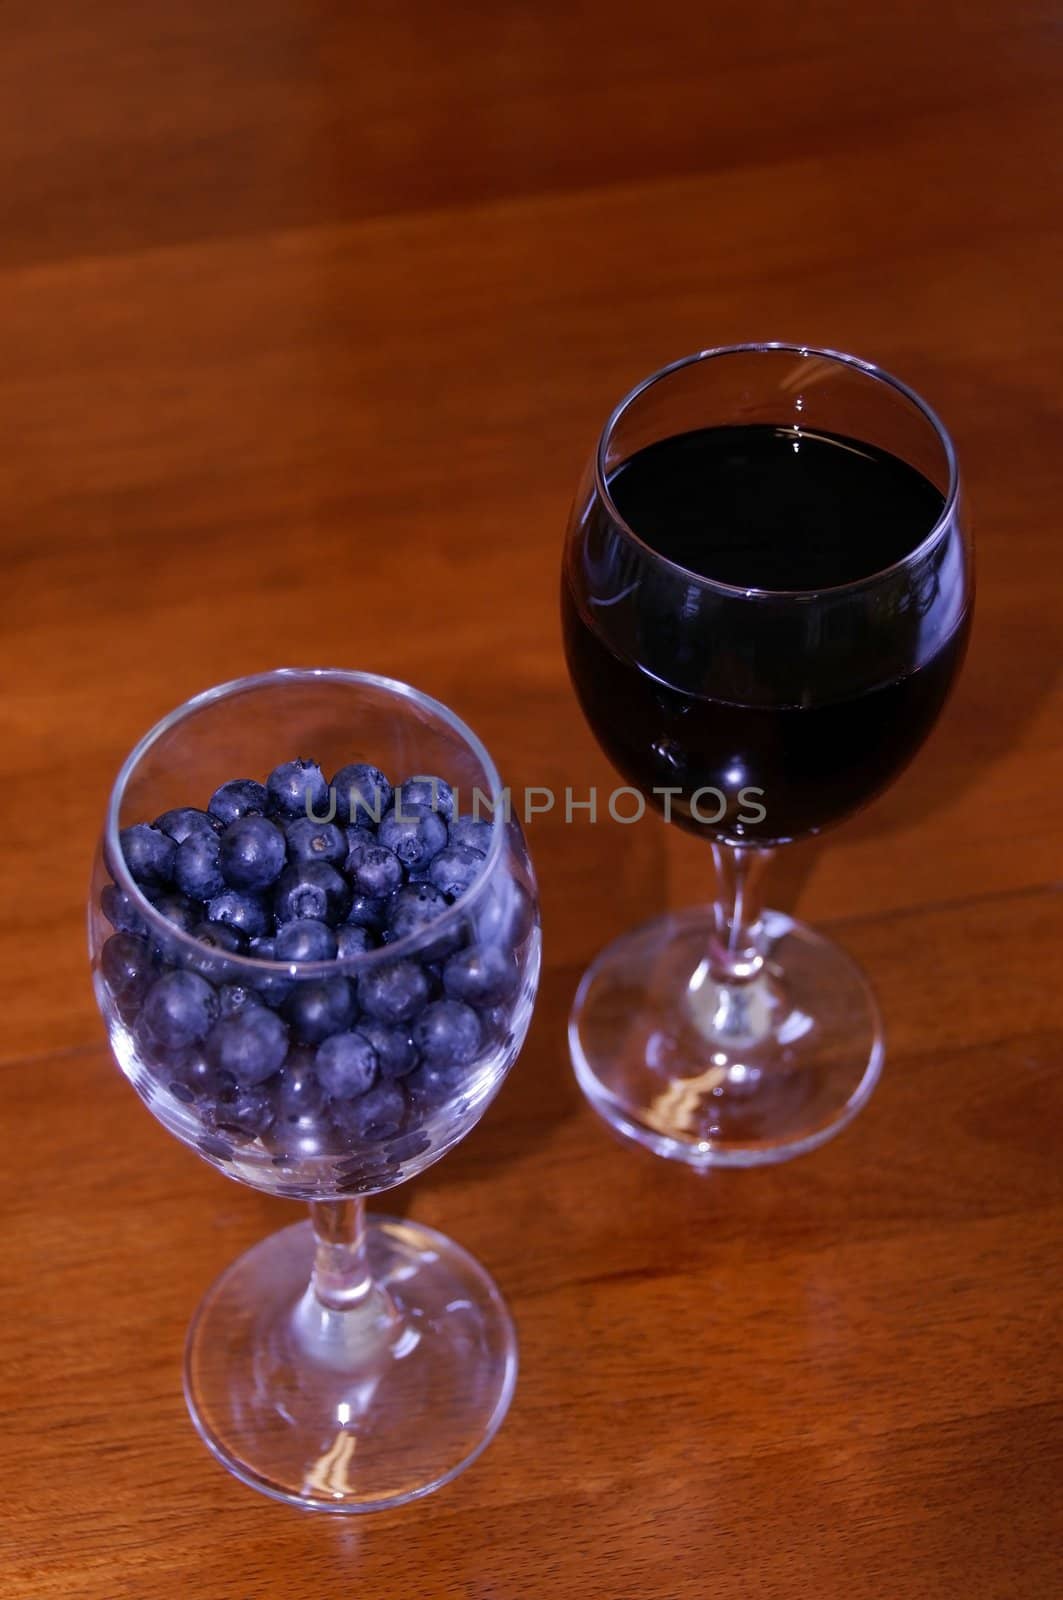 Blueberries and wine in wine glasses.